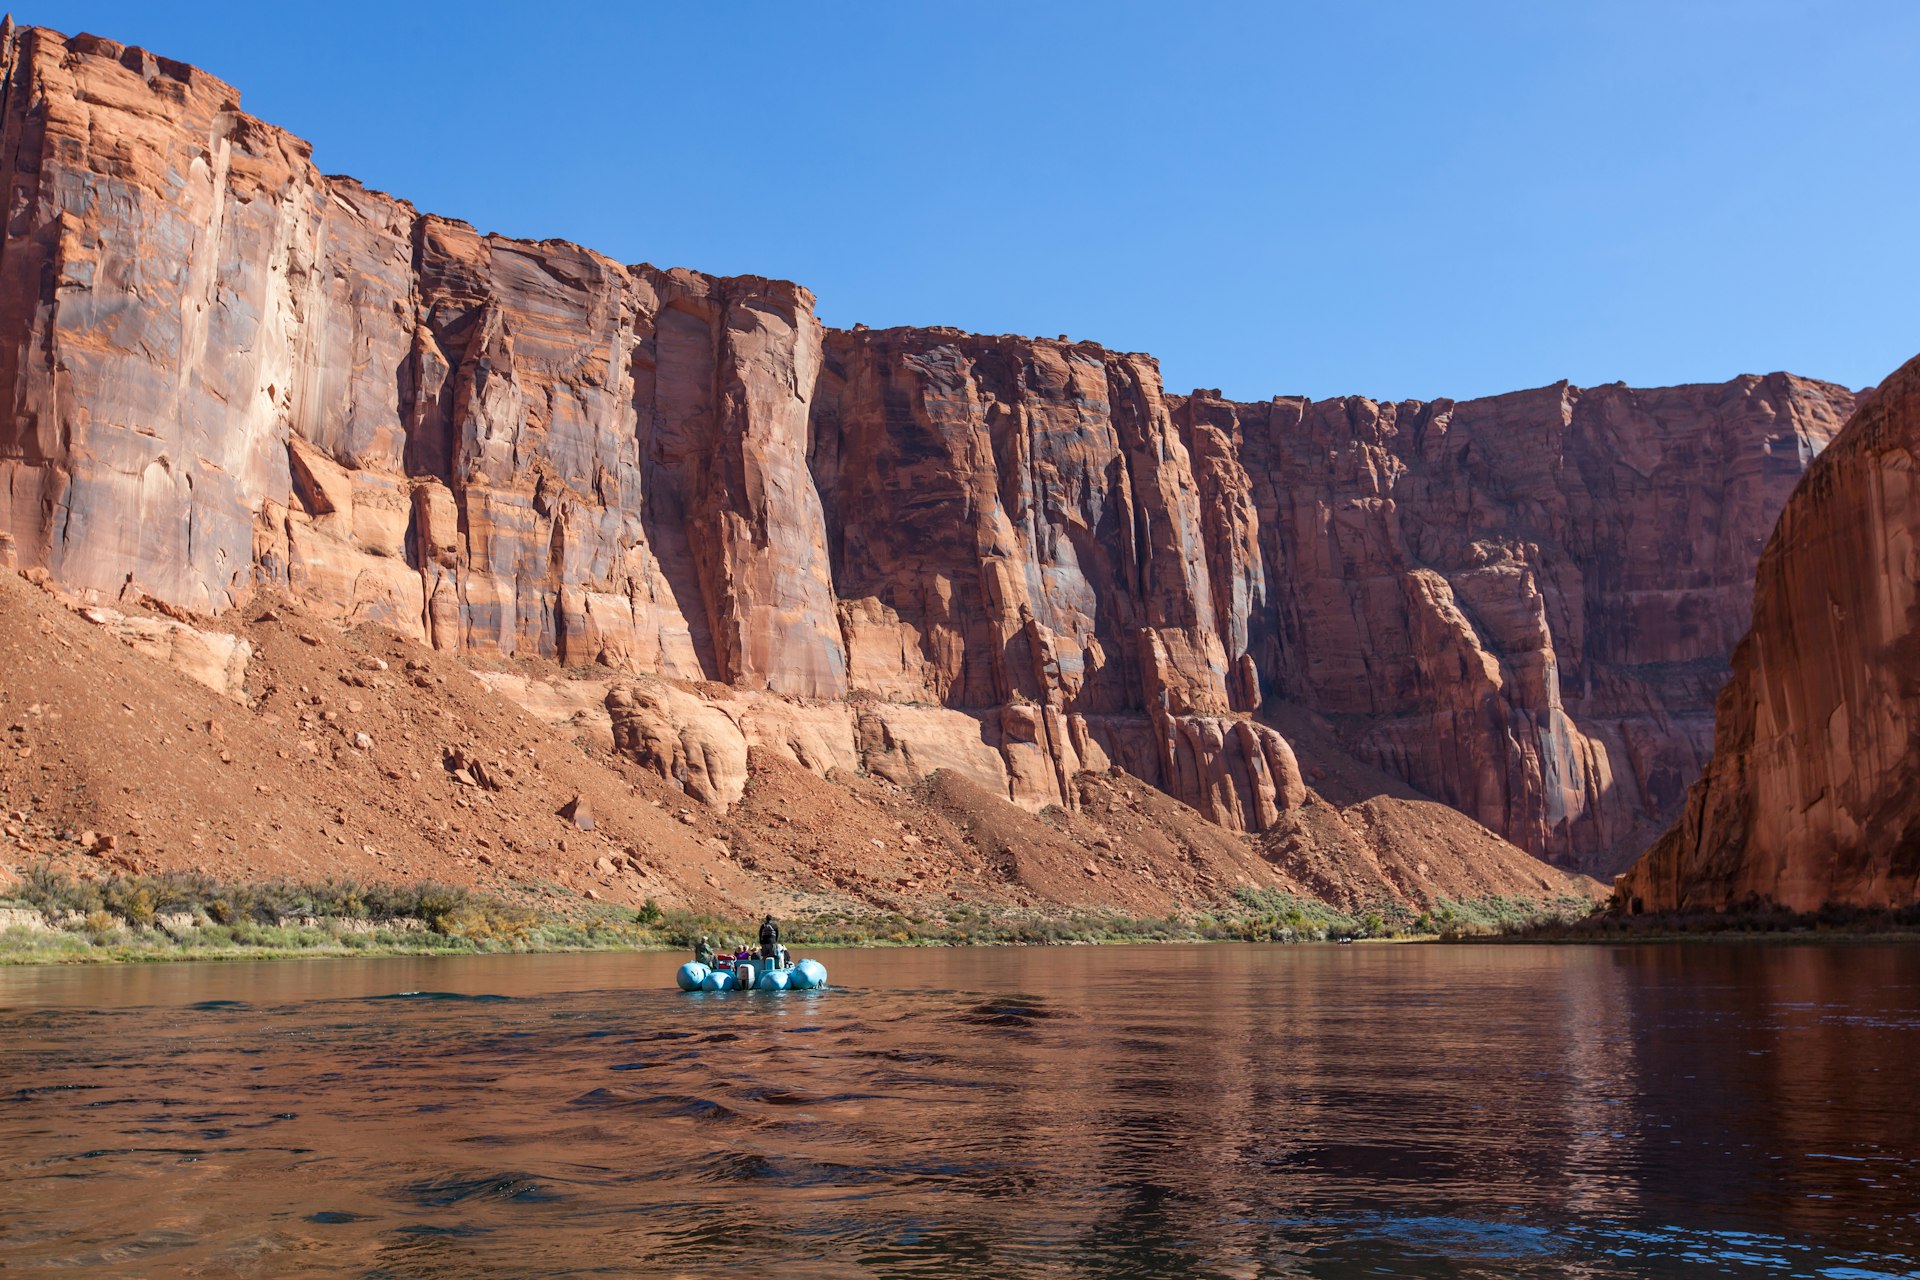 People rafting on a calm area of the Colorado River through Horseshoe Bend in Glen Canyon on a clear sunny day